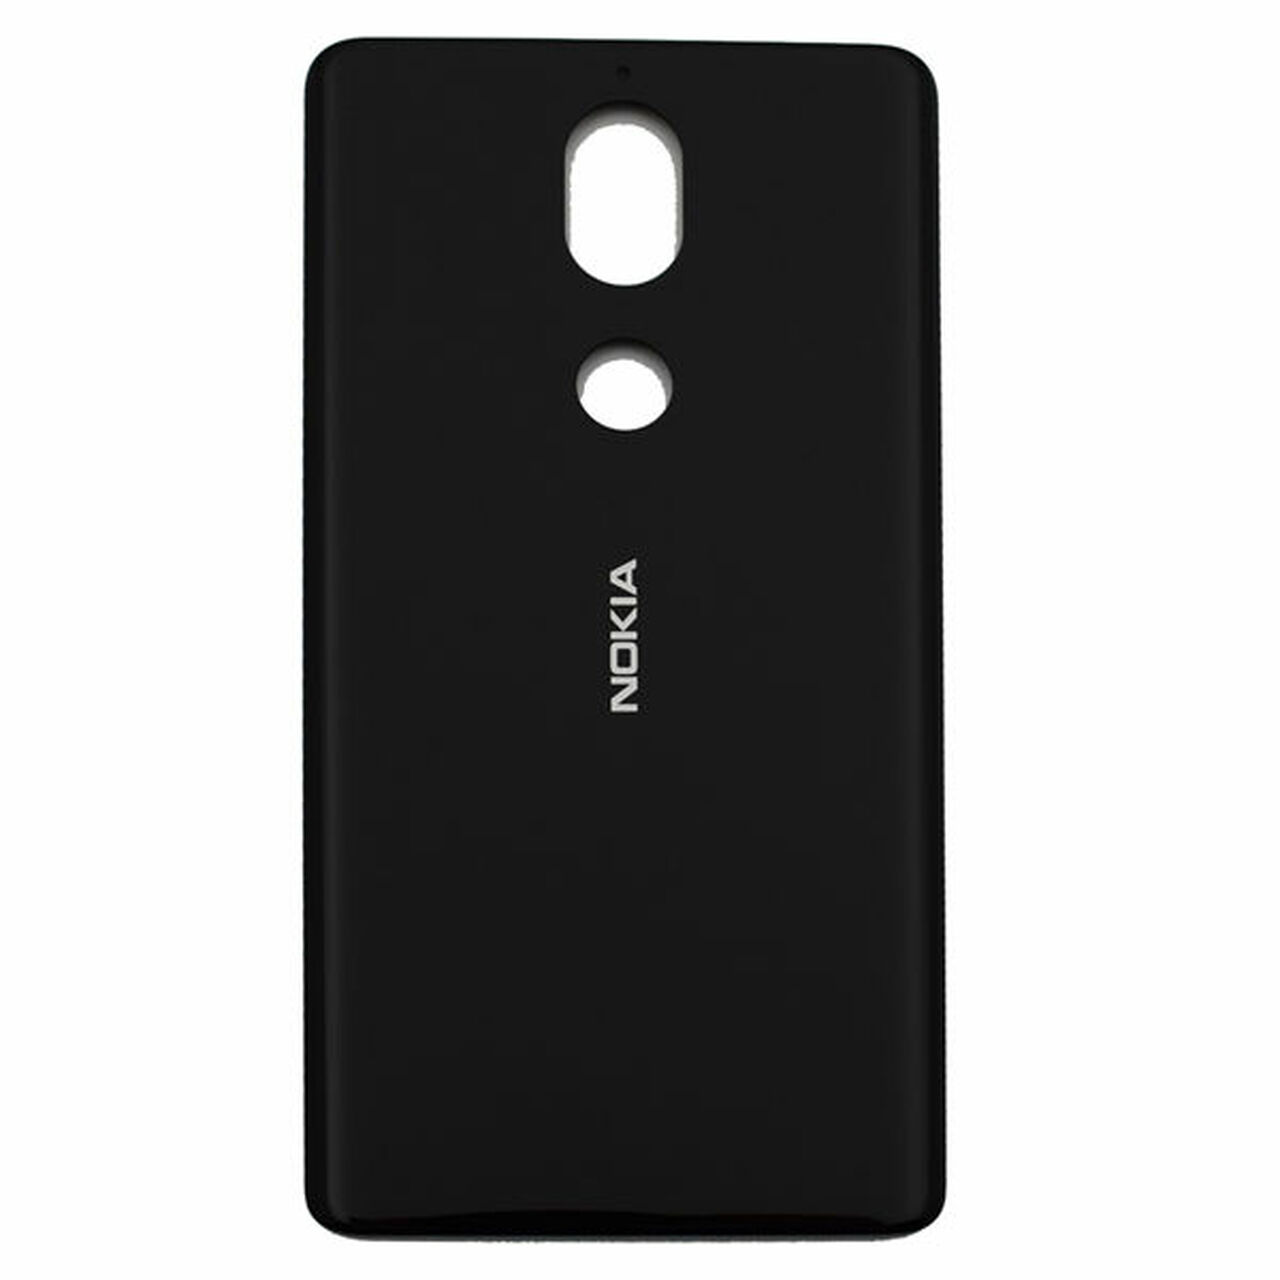 NOKIA 7 Back Battery Cover in Black